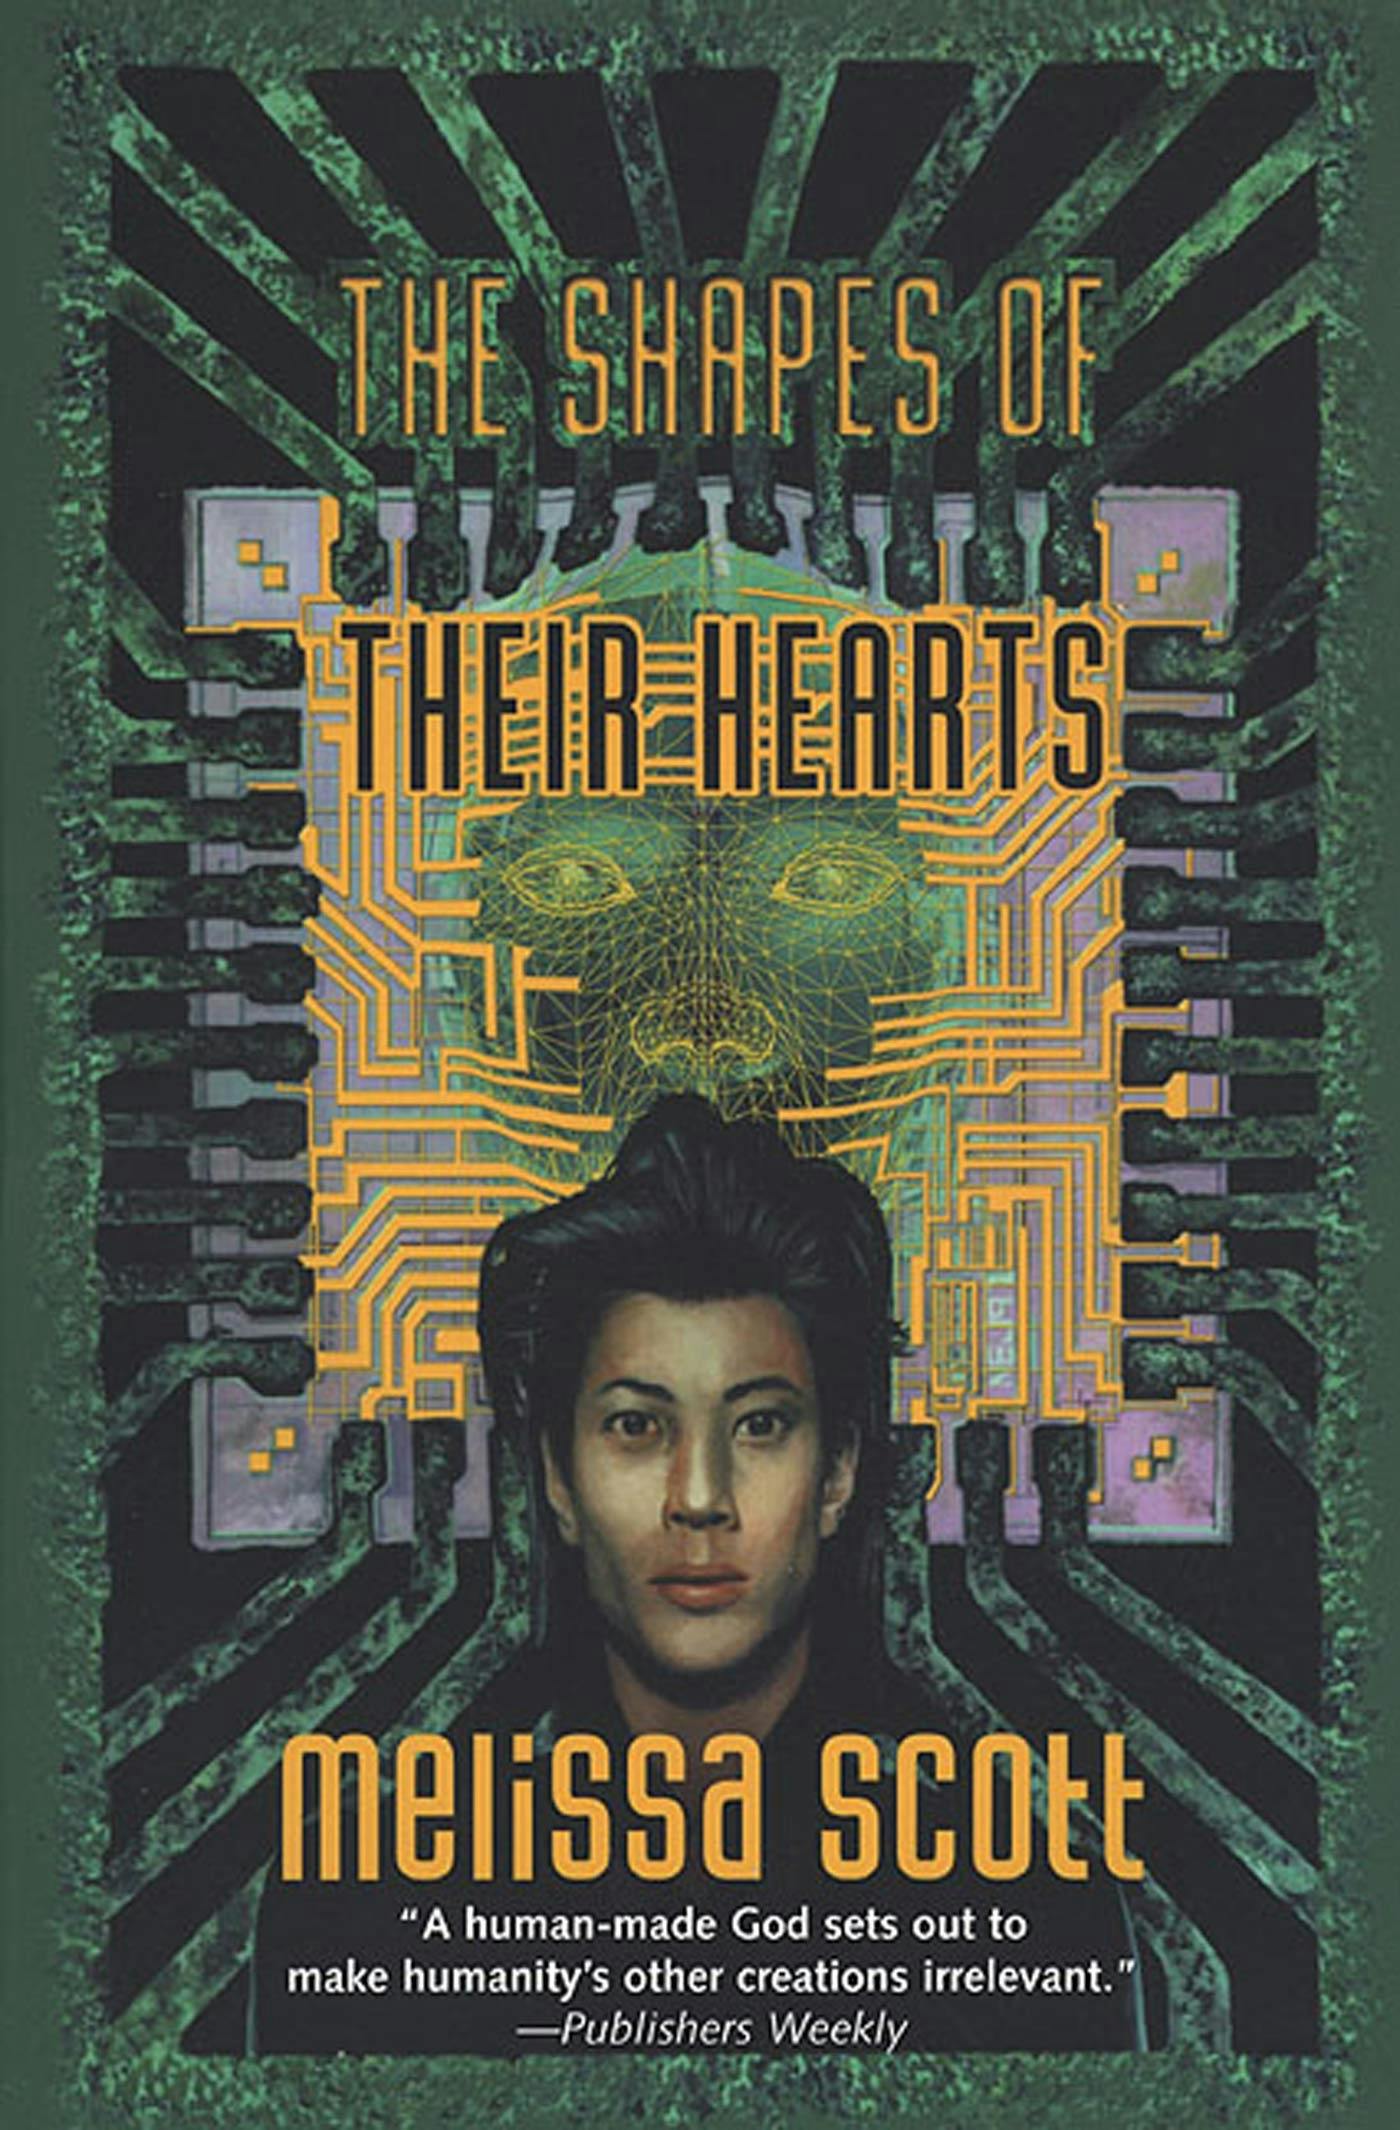 Cover for the book titled as: The Shapes of their Hearts